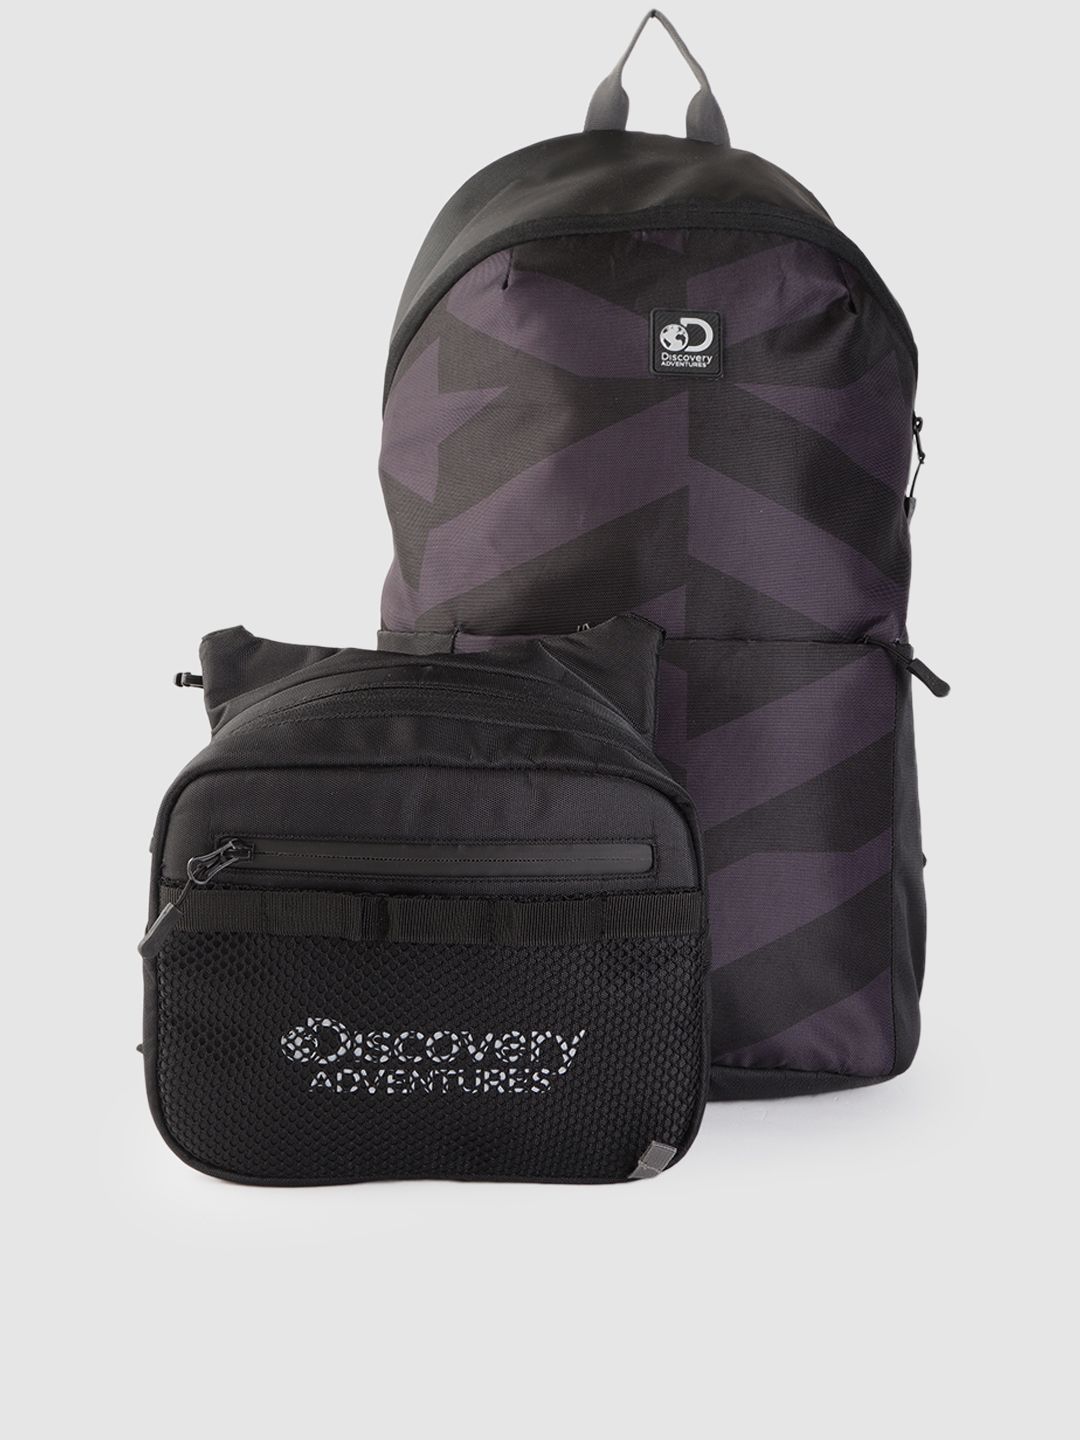 The Roadster Lifestyle Co x Discovery Adventures Unisex Black & Purple 16 Inch Laptop Backpack & Pouch Price in India